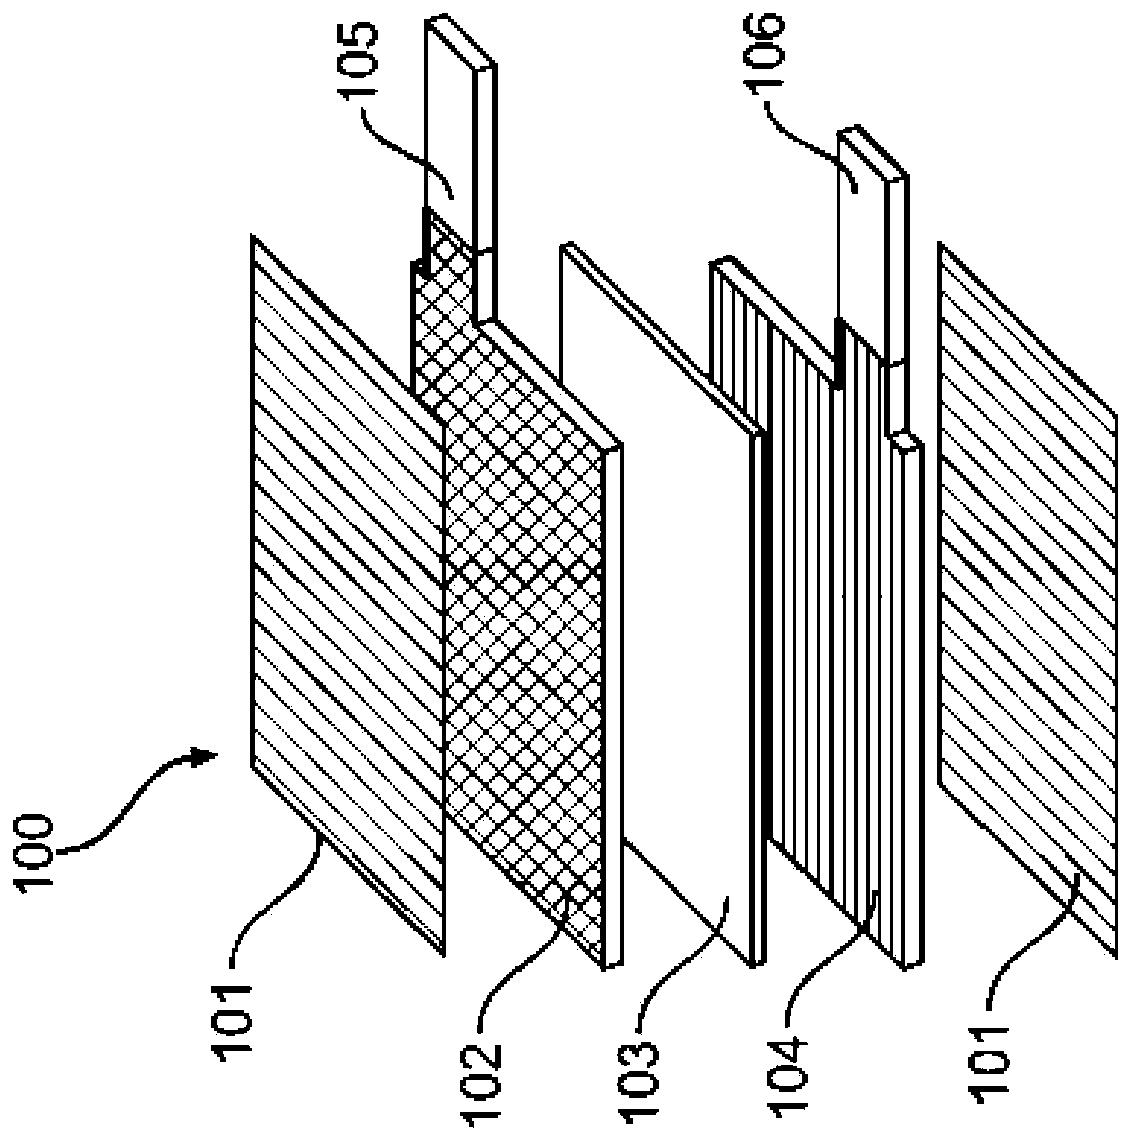 Flexible battery as integration platform for wearable sensors and processing/transmitting devices